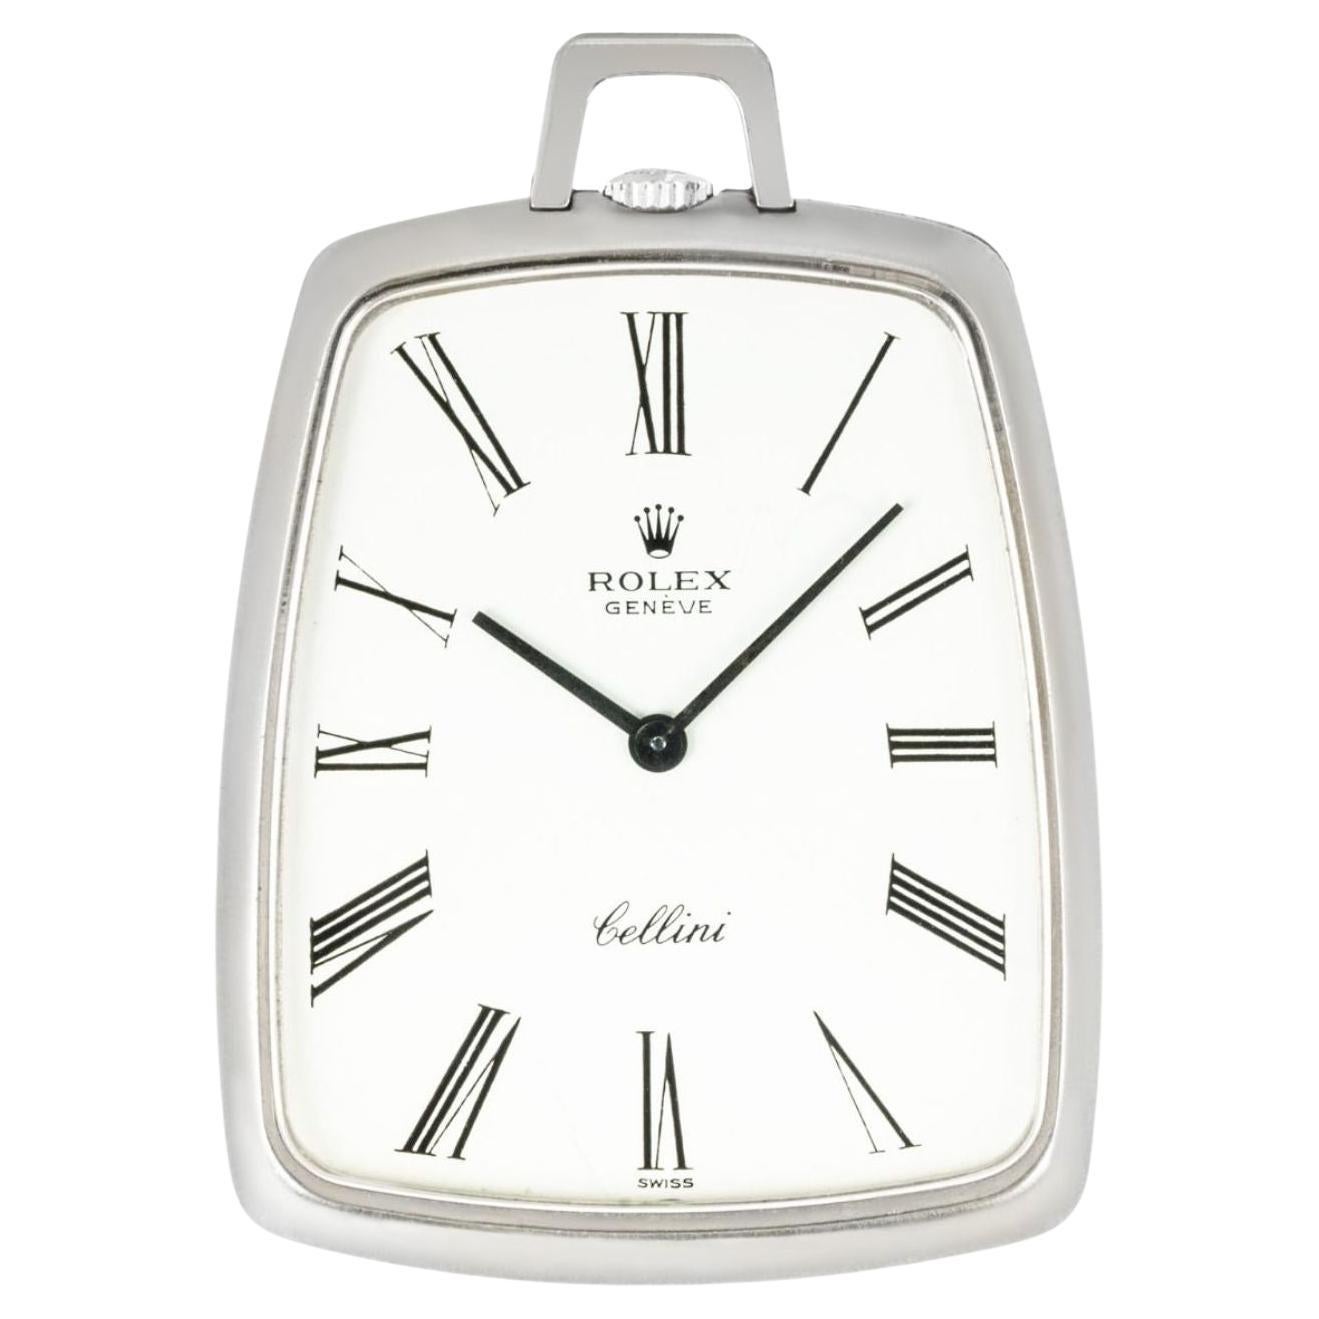 Rolex Cellini White Gold Keyless Lever Dress Pocket Watch C1970 For Sale